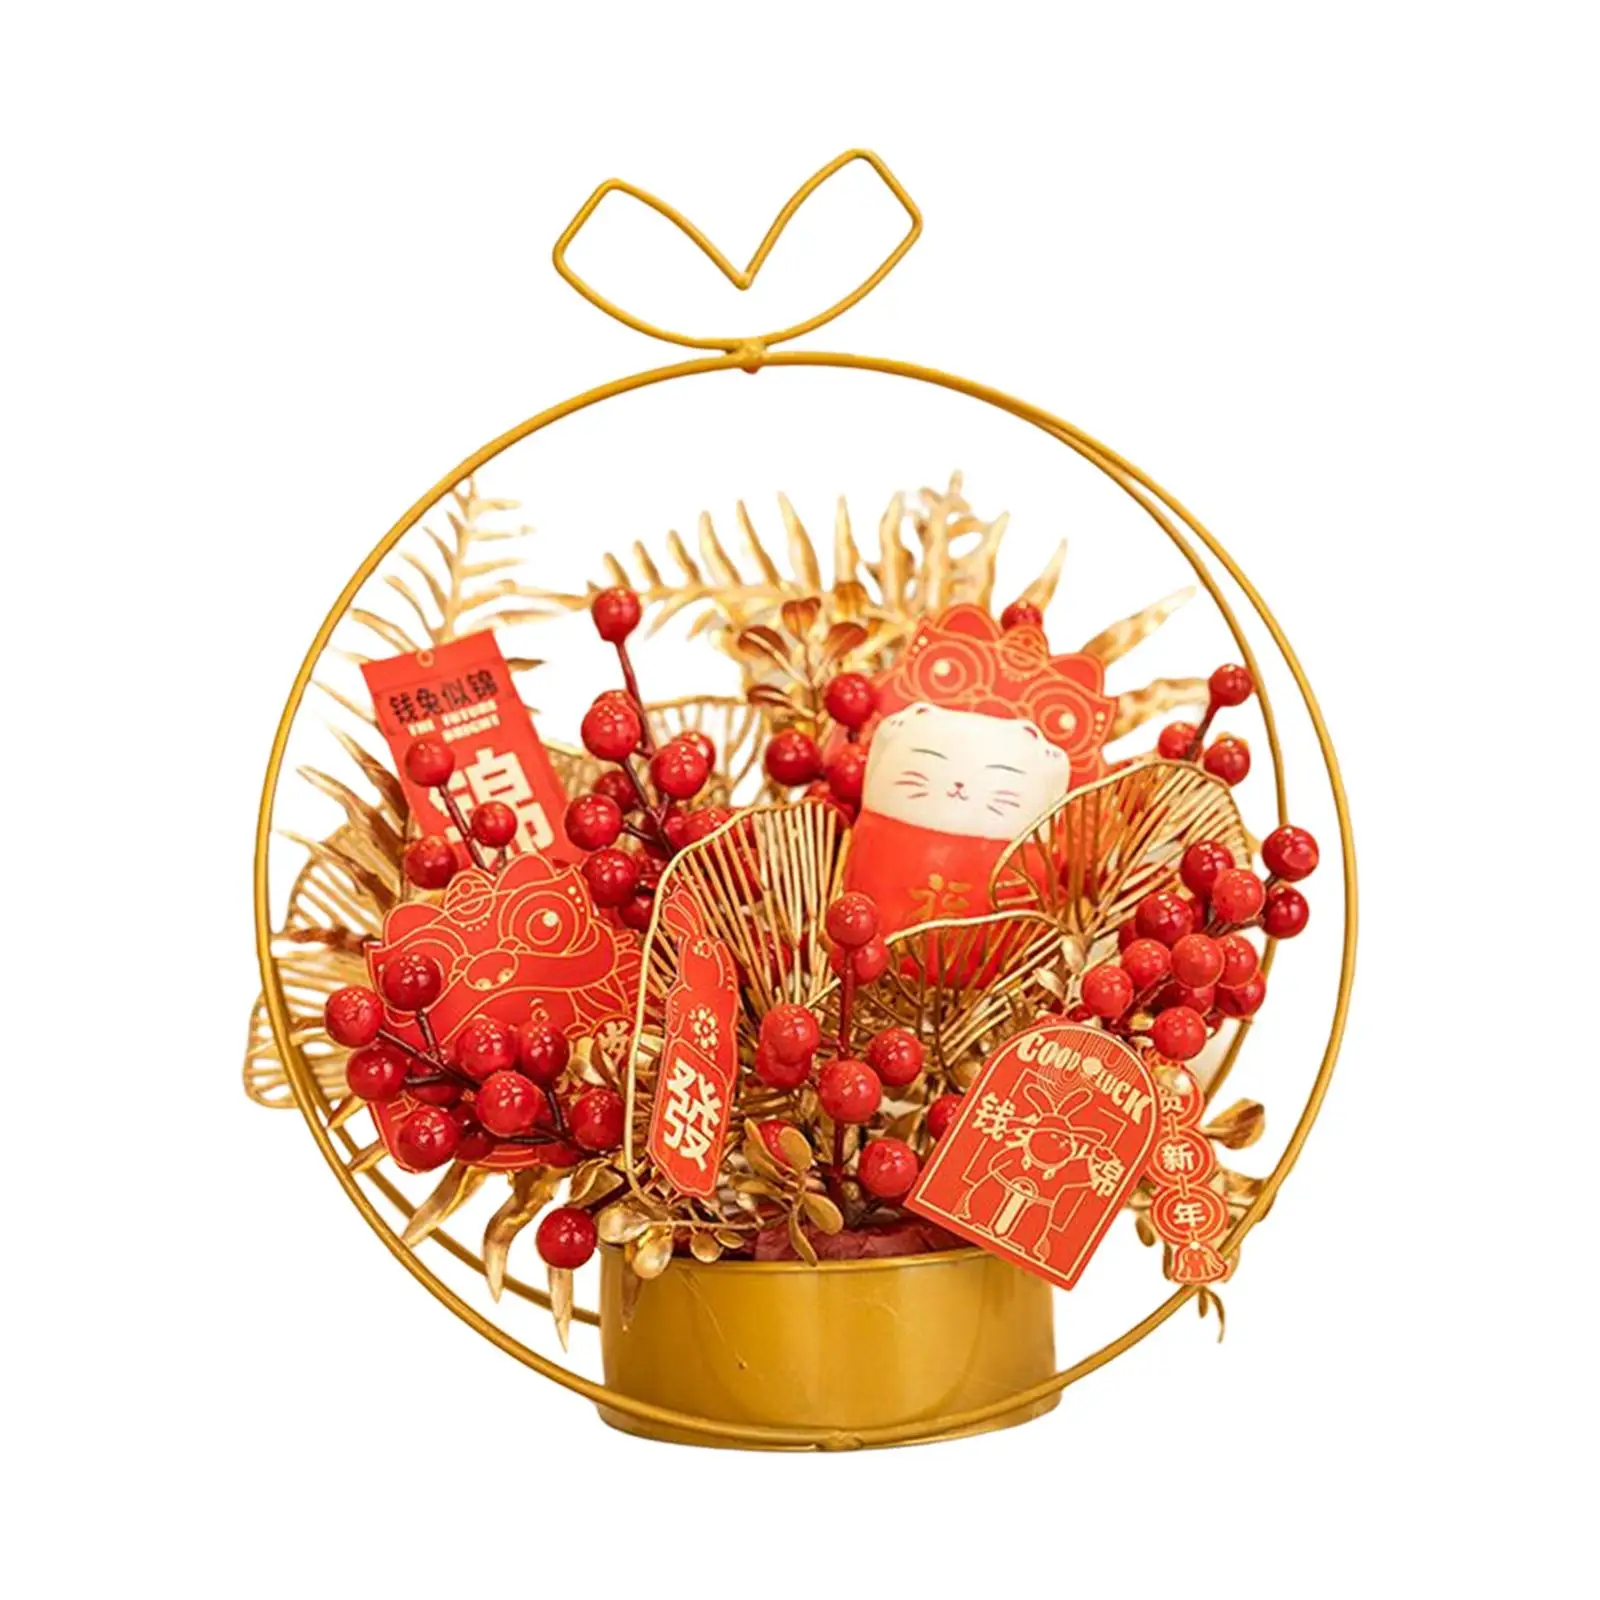 Simulation Chinese Flower Iron Basket Table Centerpiece Decor Classic Chinese Red Color Wedding Party Gift Accessory Decorative